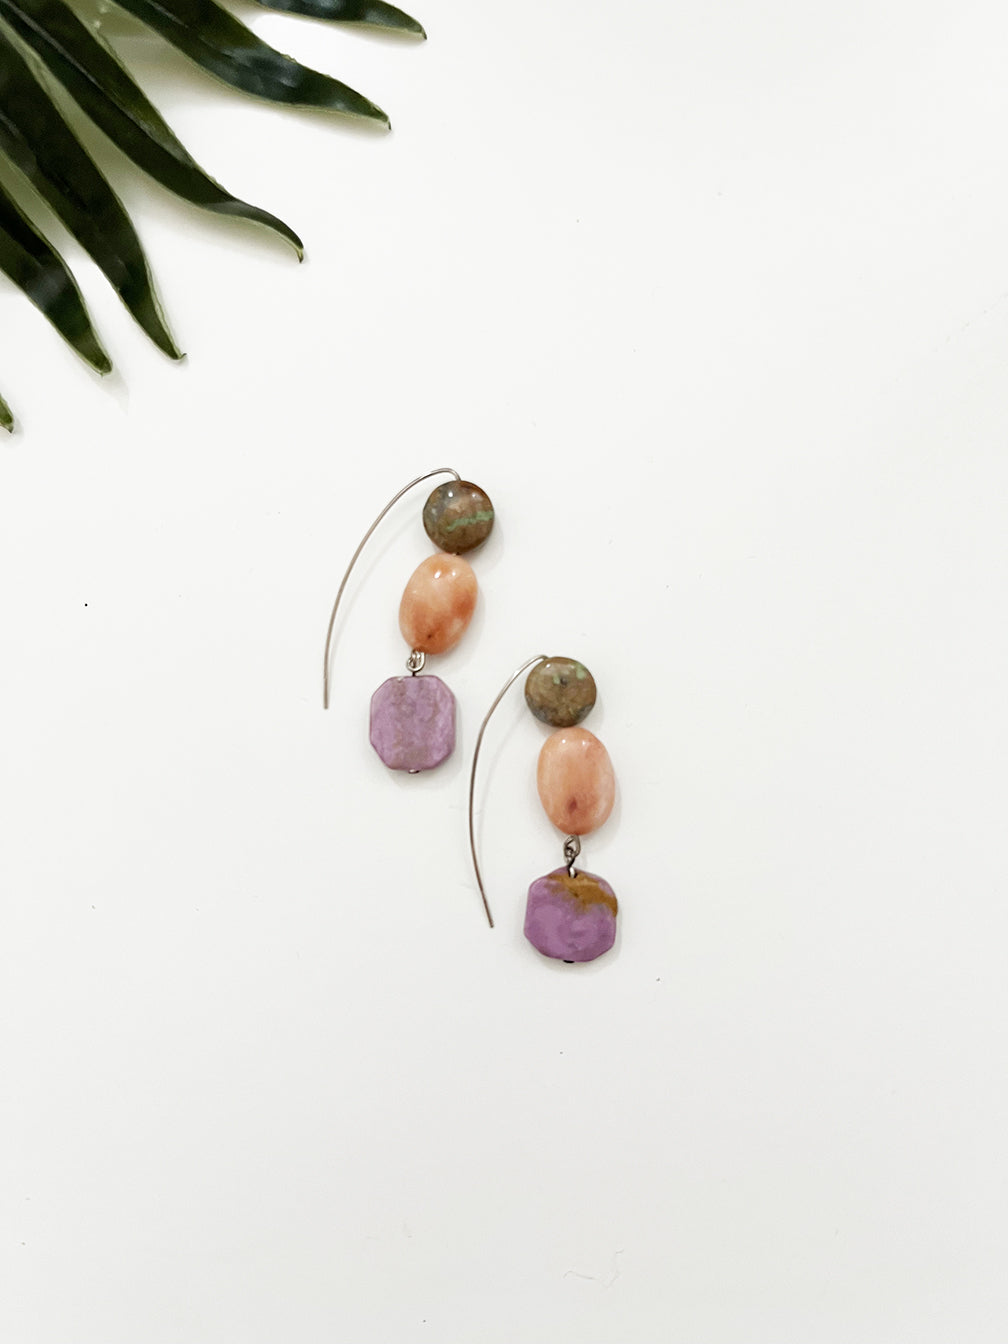 fuzzy peach - collage earrings  - peach and lavender